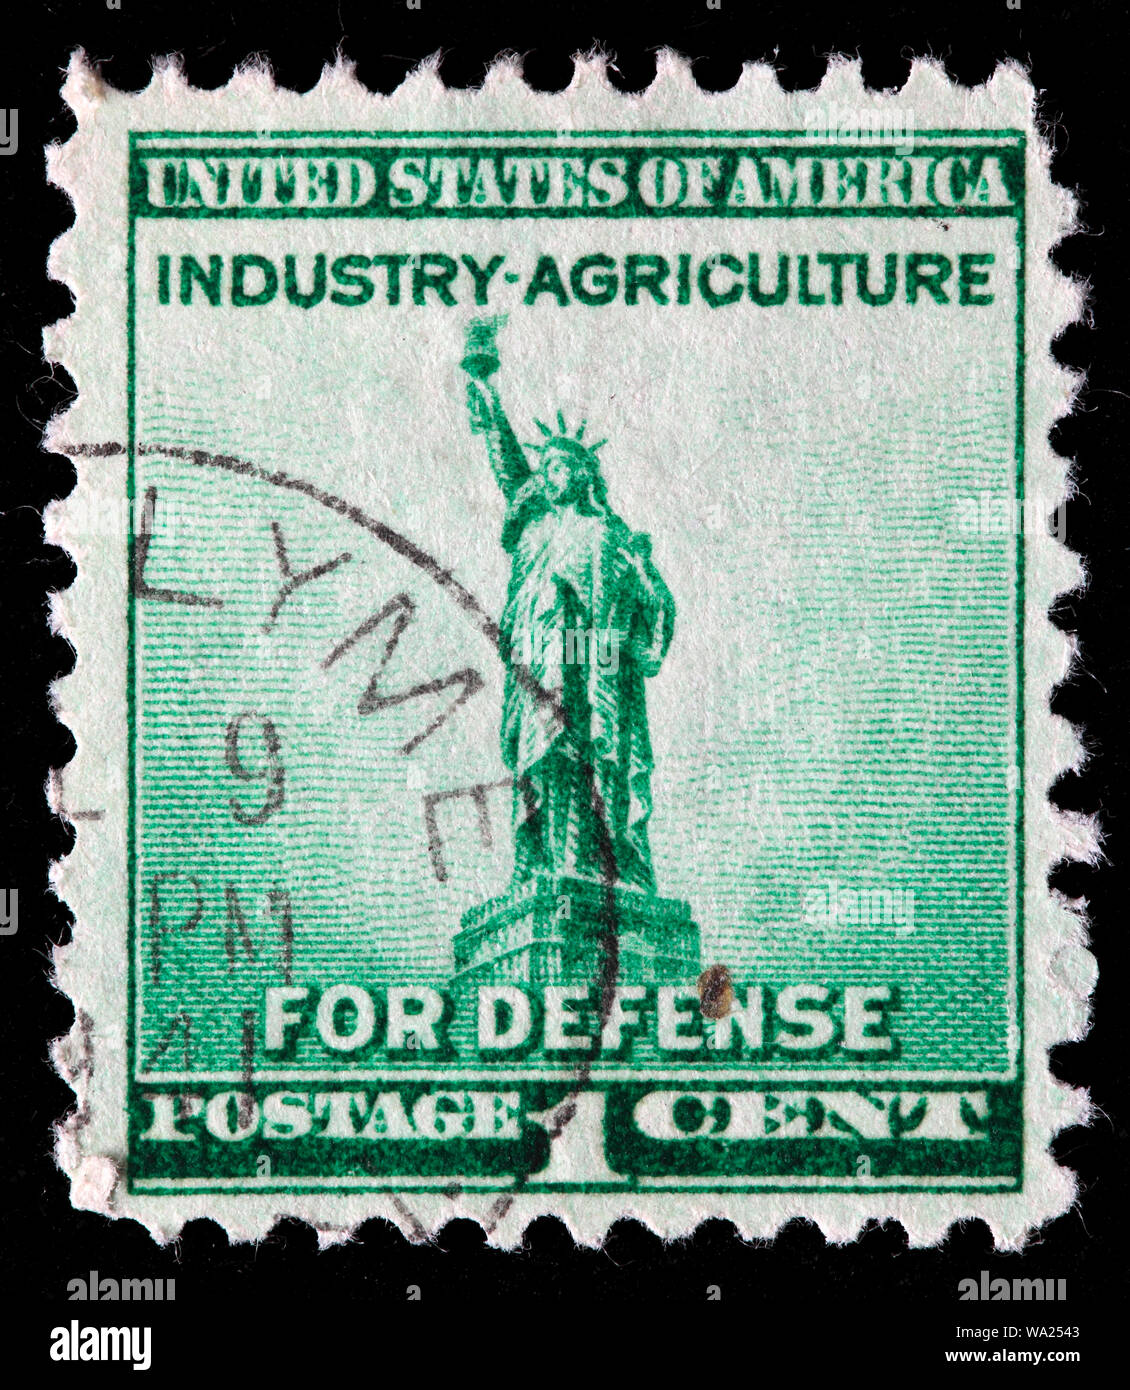 Free: 1-Cent Industry-Agriculture for Defense Stamp! - Stamps -   Auctions for Free Stuff